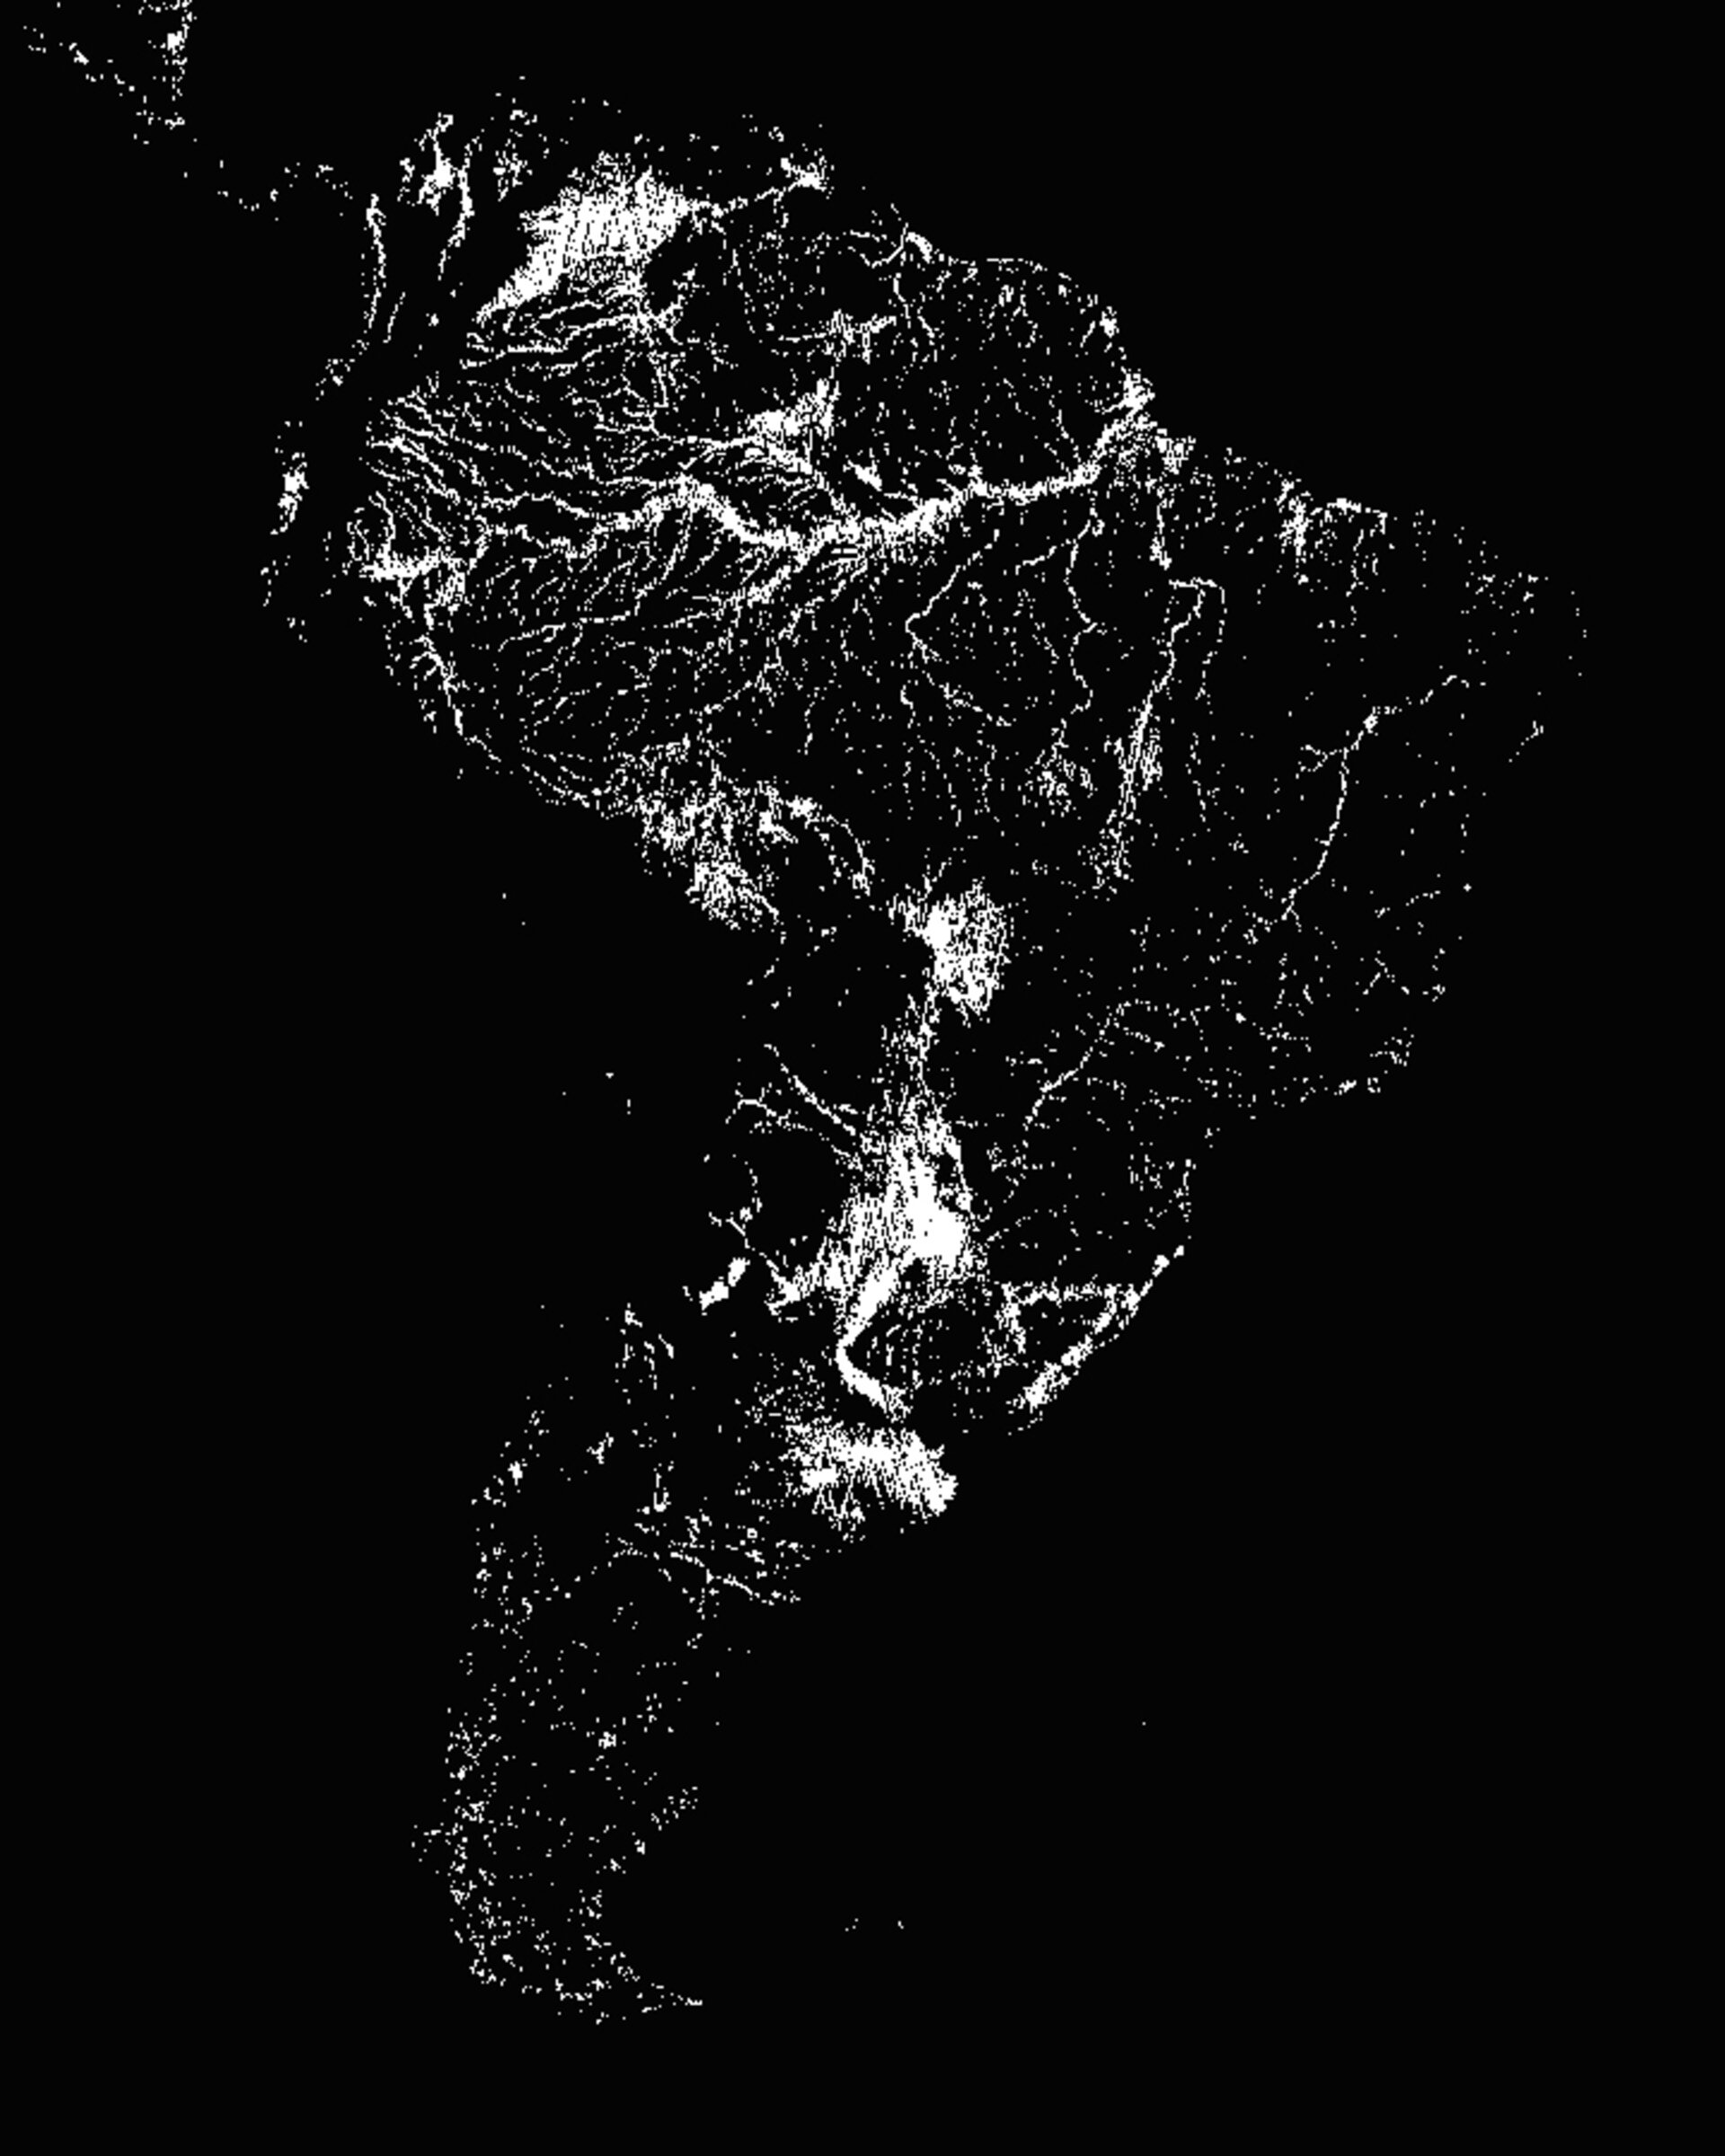 South American river and lake detection